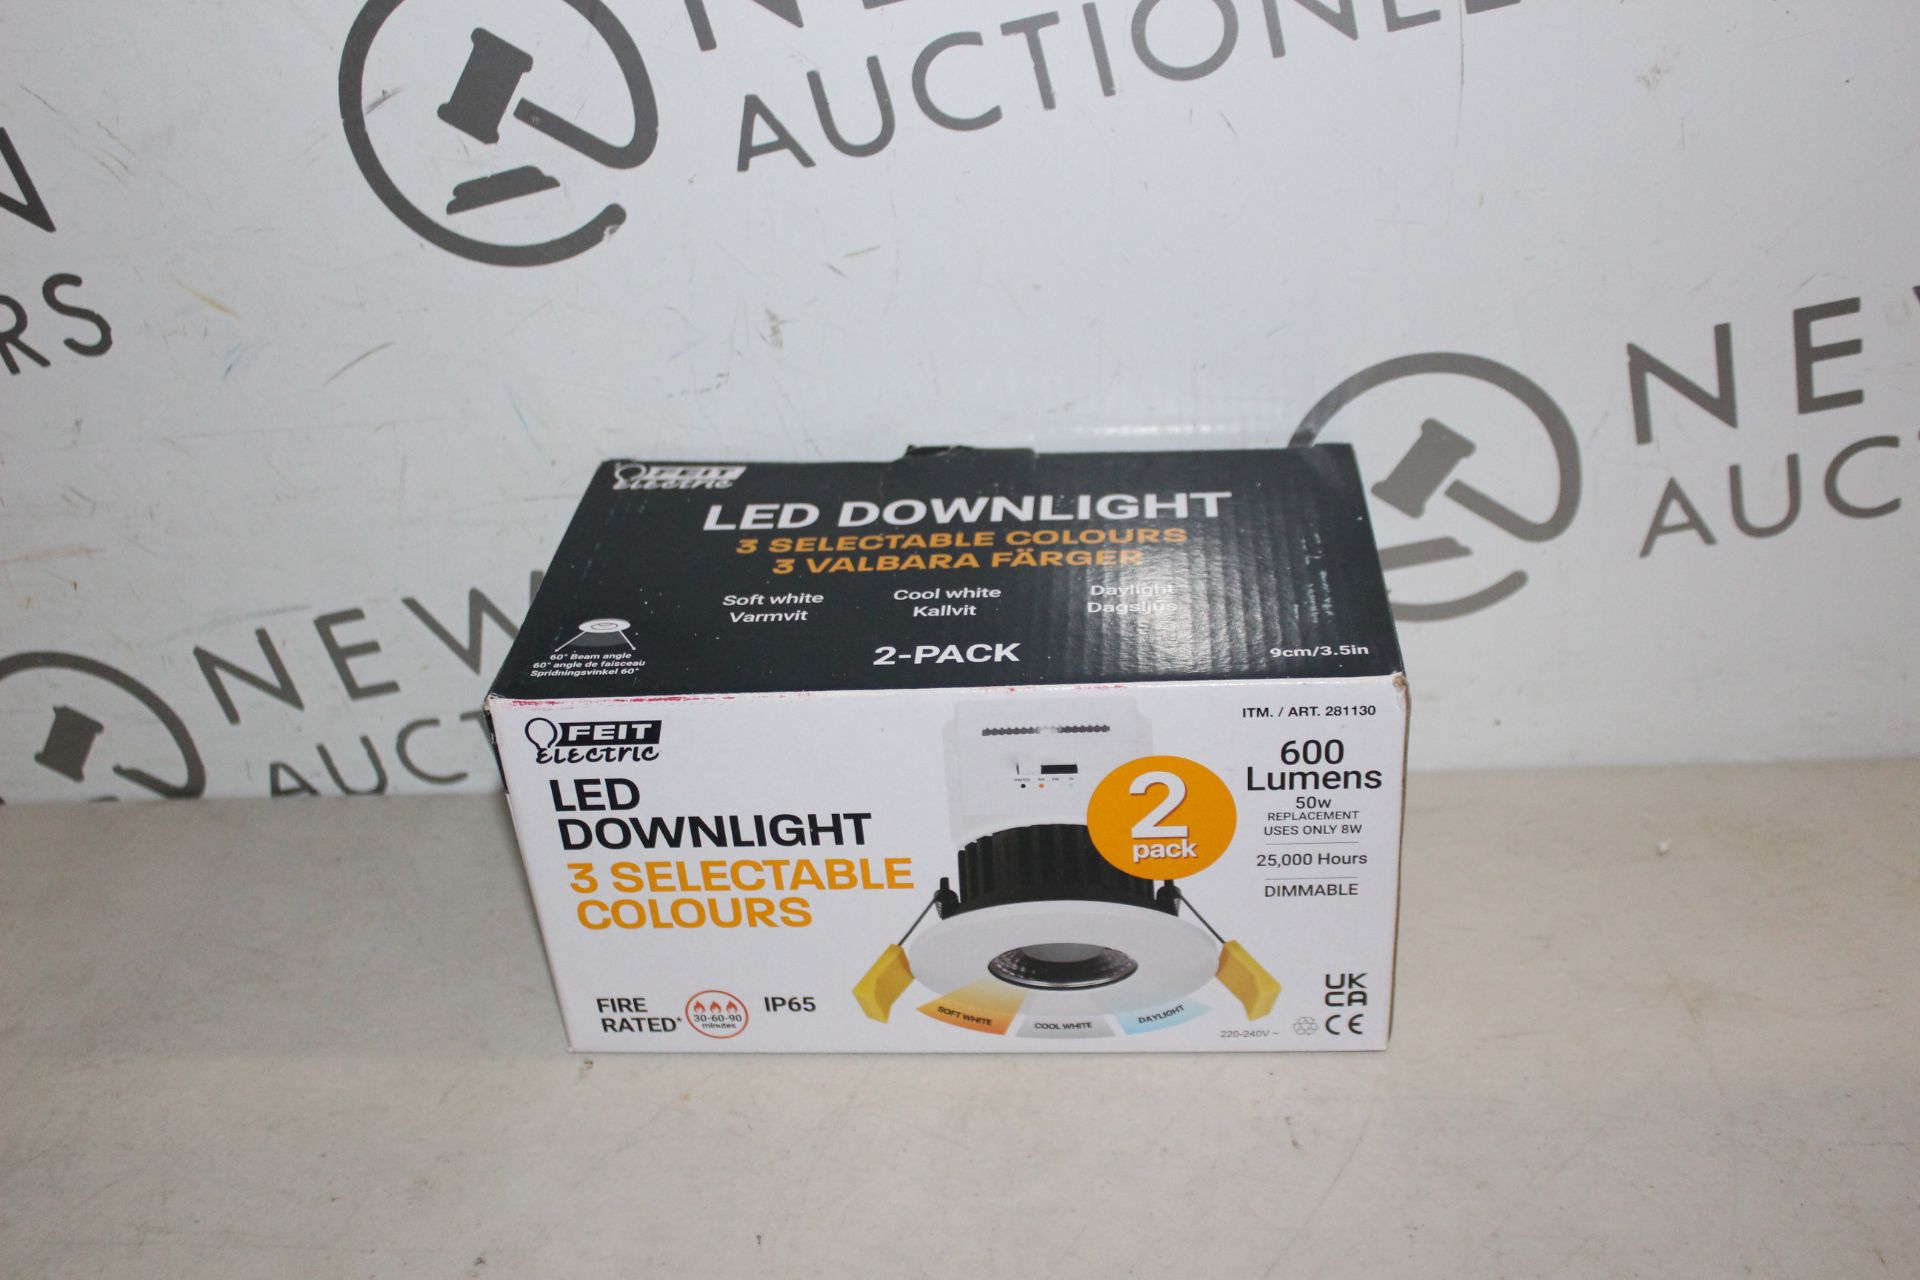 1 BOXED FEIT ELECTRIC 2-PACK LED FIRE-RATED DOWNLIGHT WITH 3-COLOUR TEMPERATURES RRP Â£29